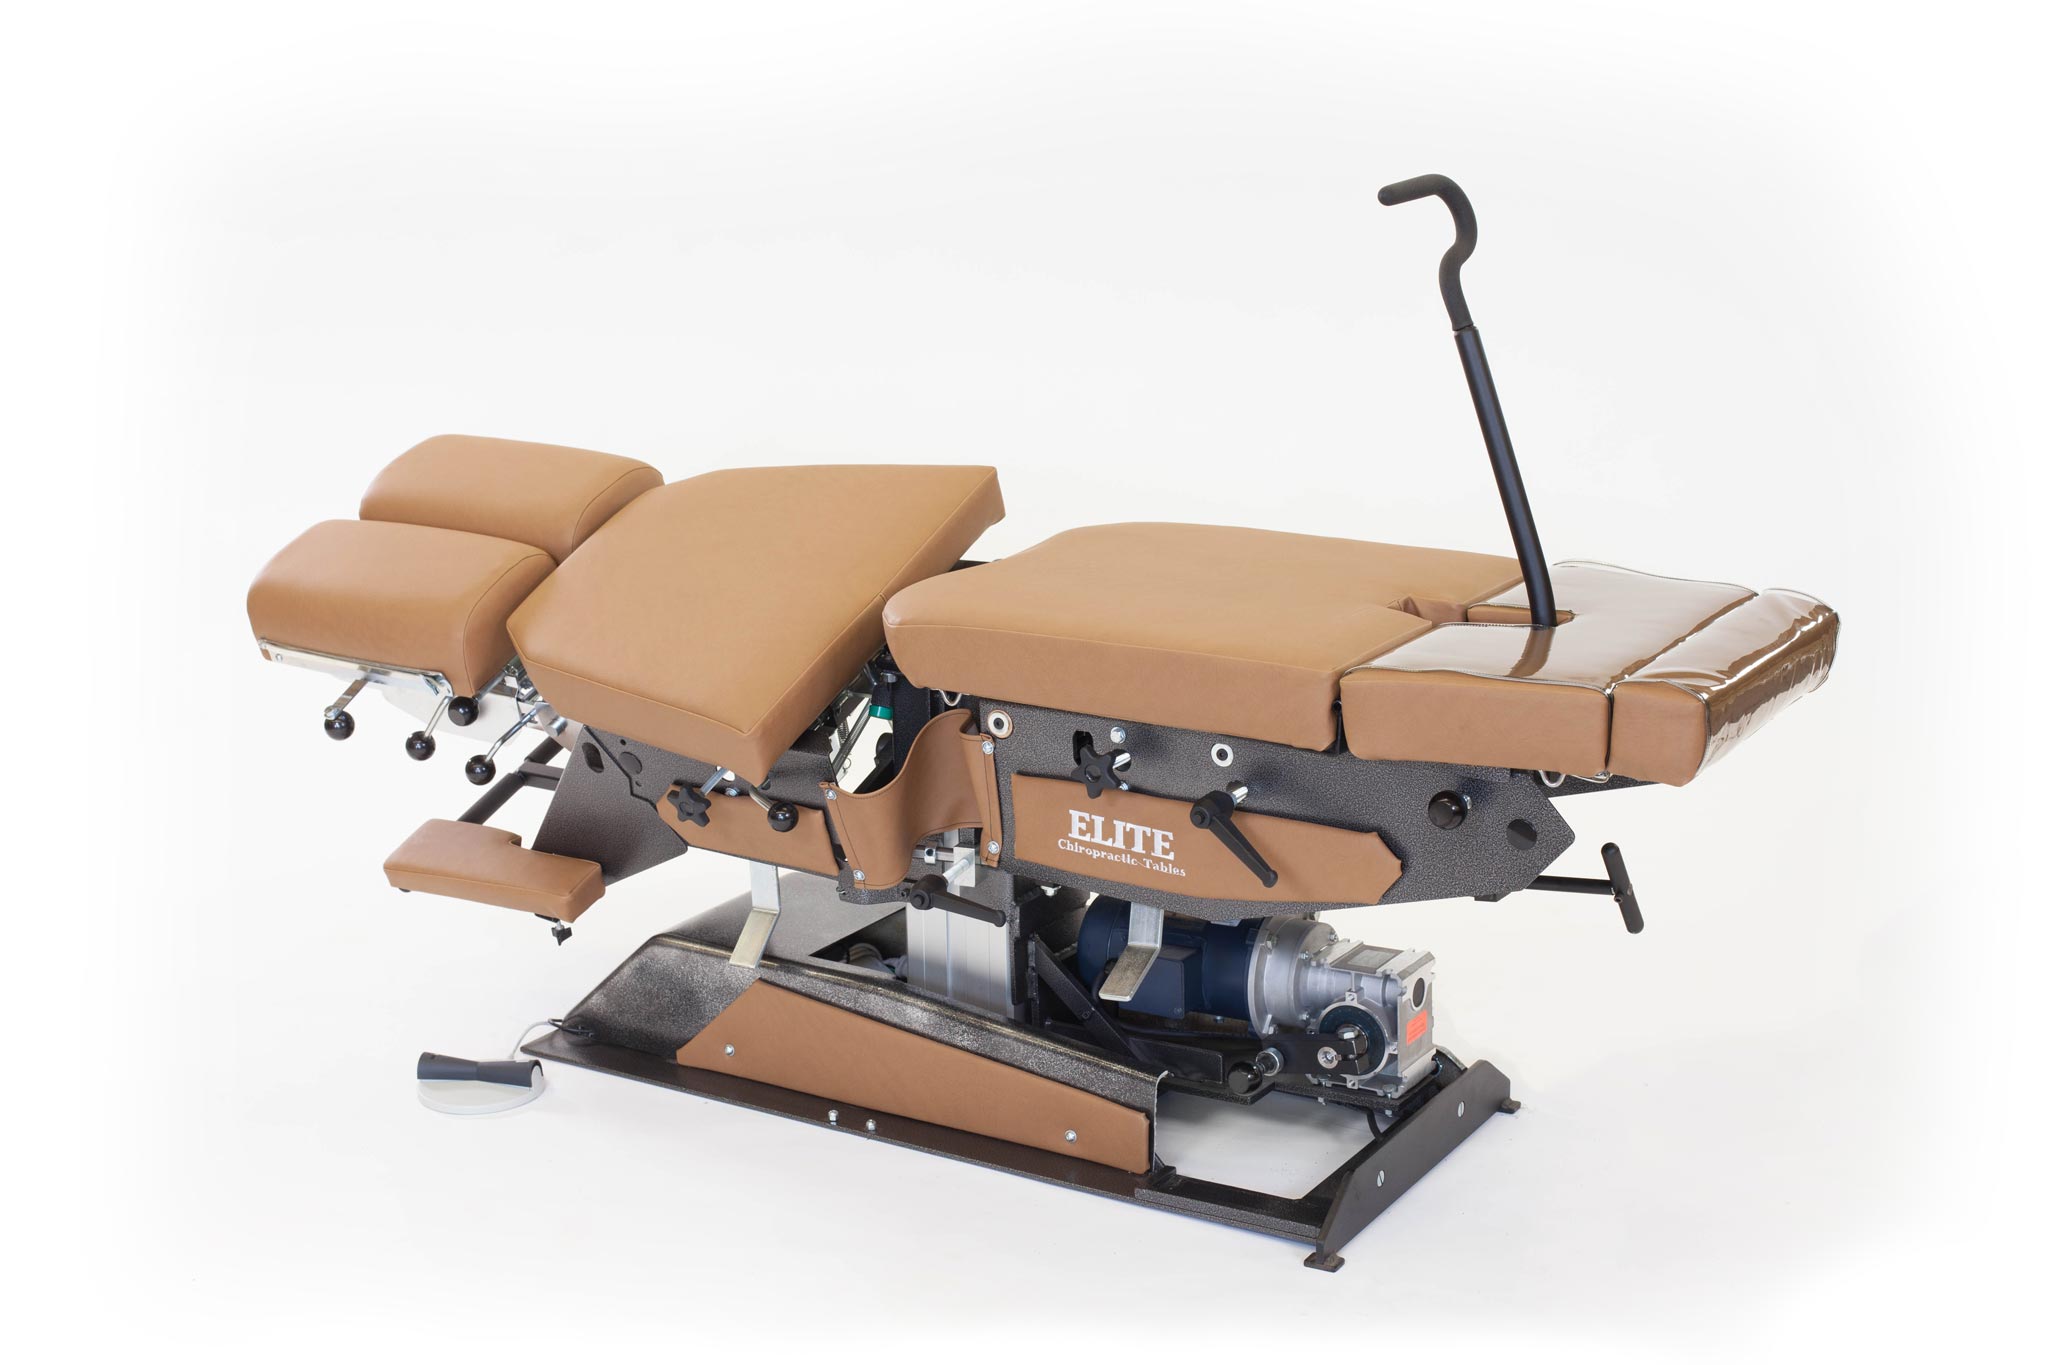 Elite Chiropractic Tables – the workhorse of the industry2048 x 1365